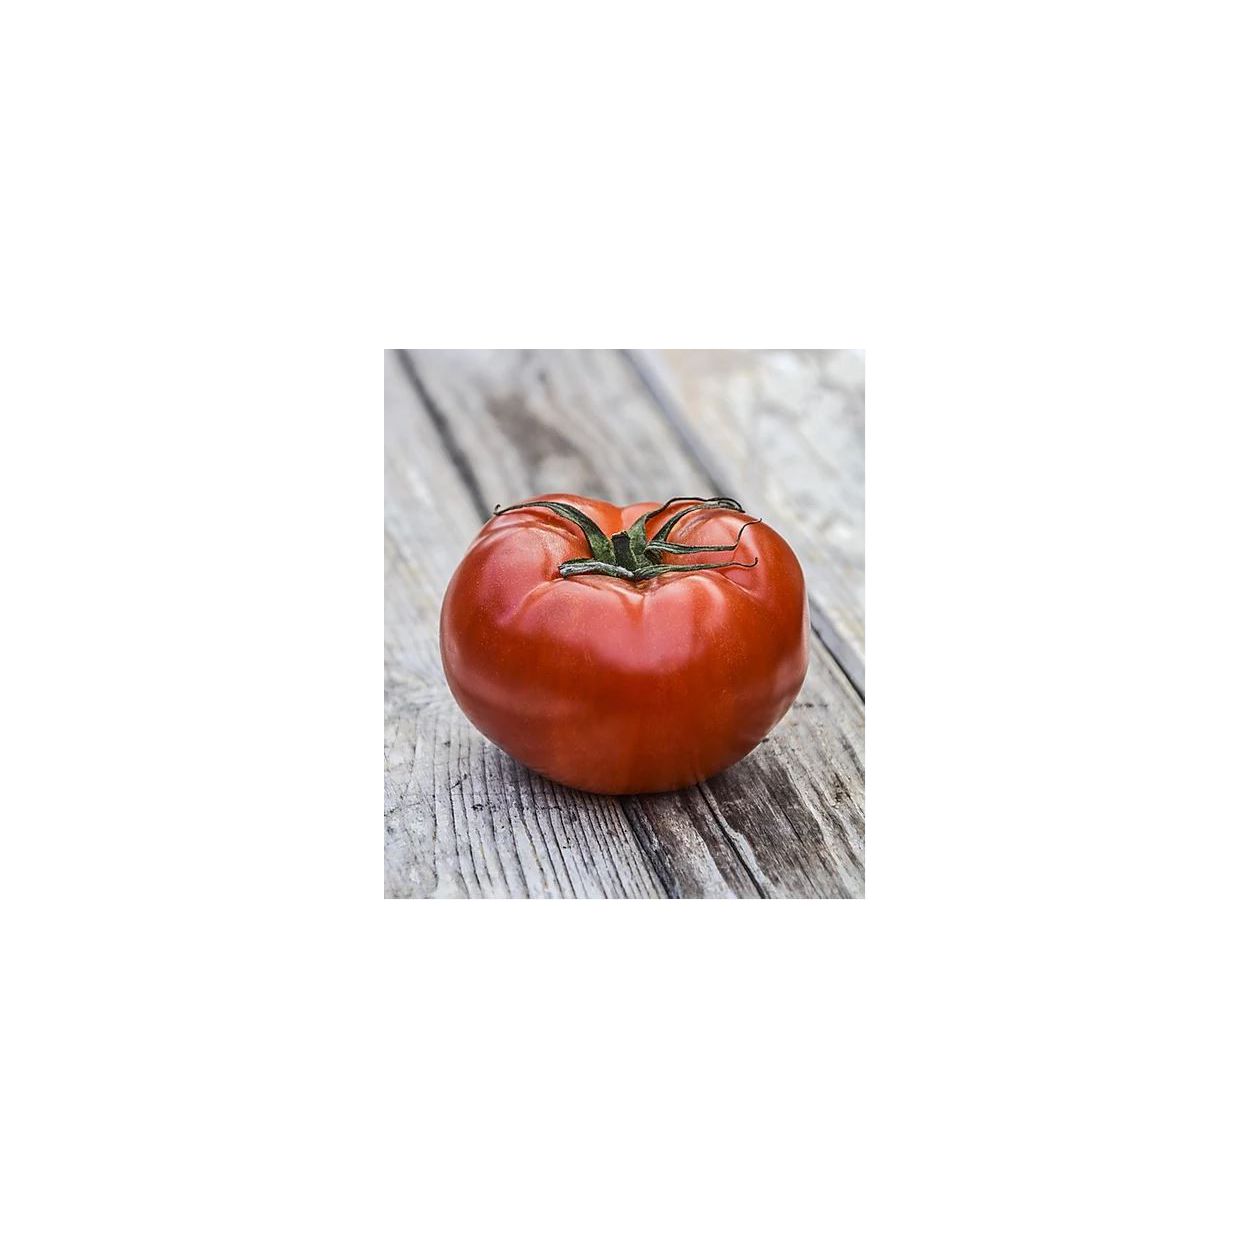 Brim Seed Co. - Delicious Tomato Heirloom Seed